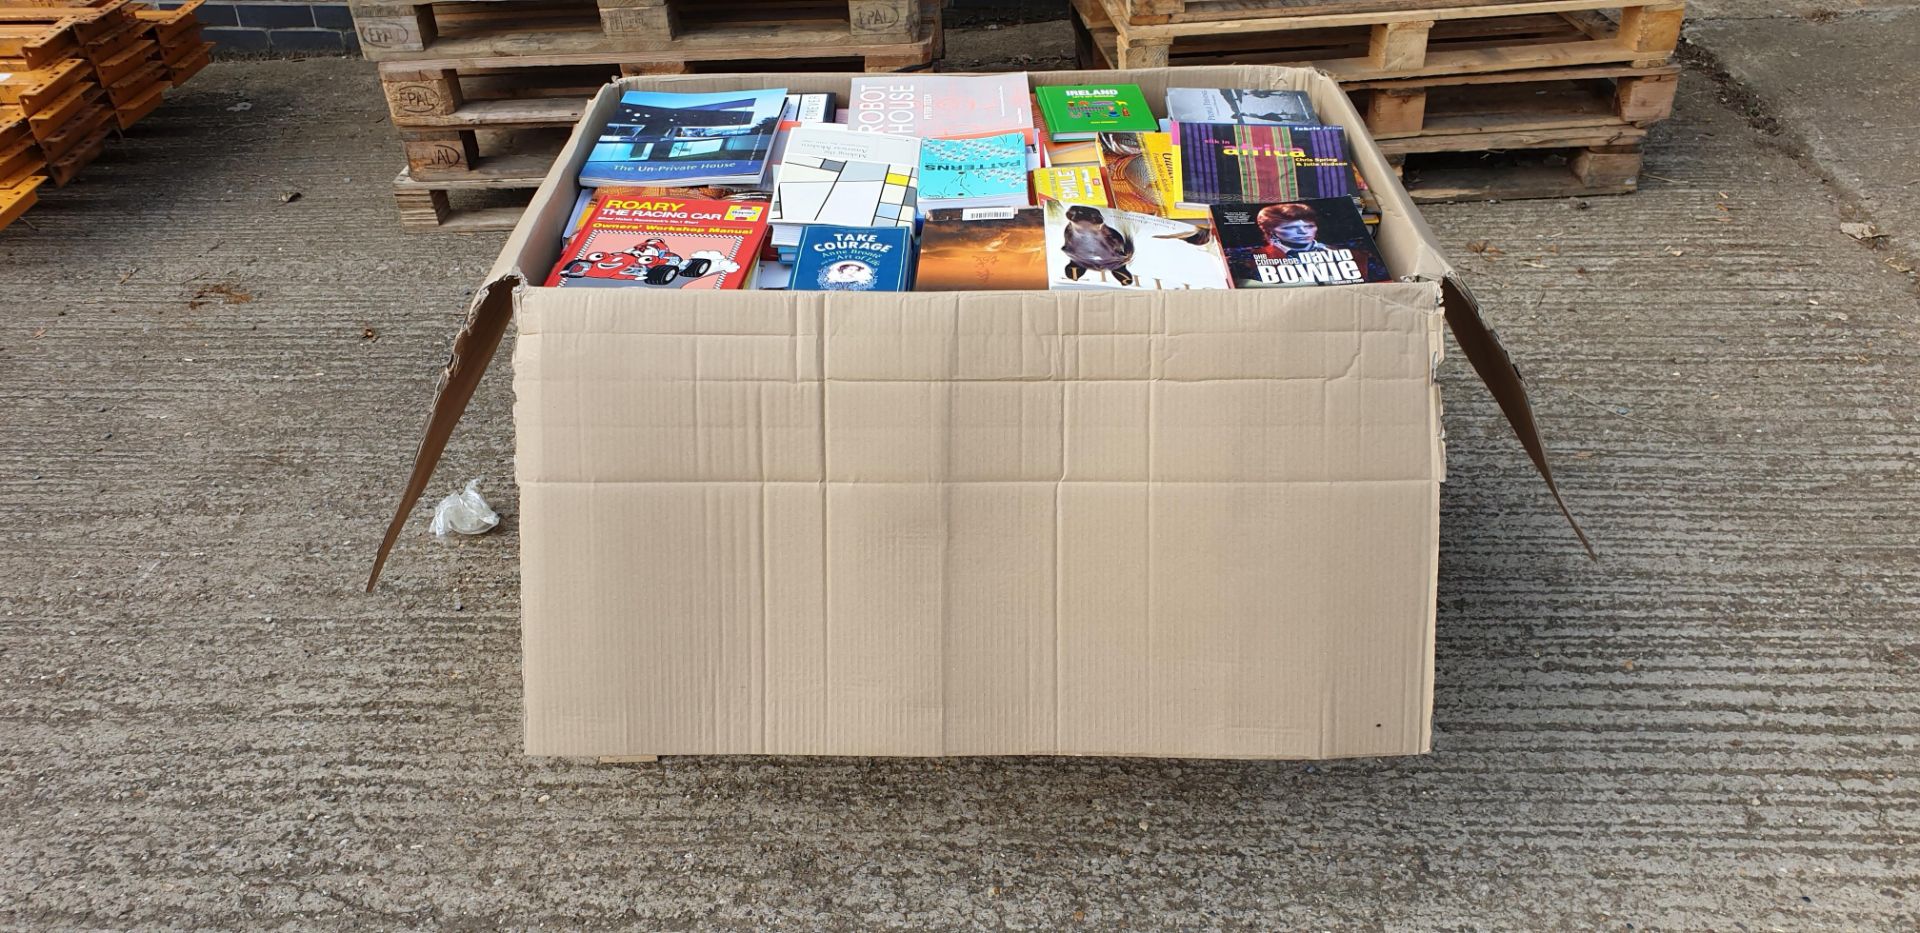 pallet of assorted books new with shelf wear - Image 2 of 2